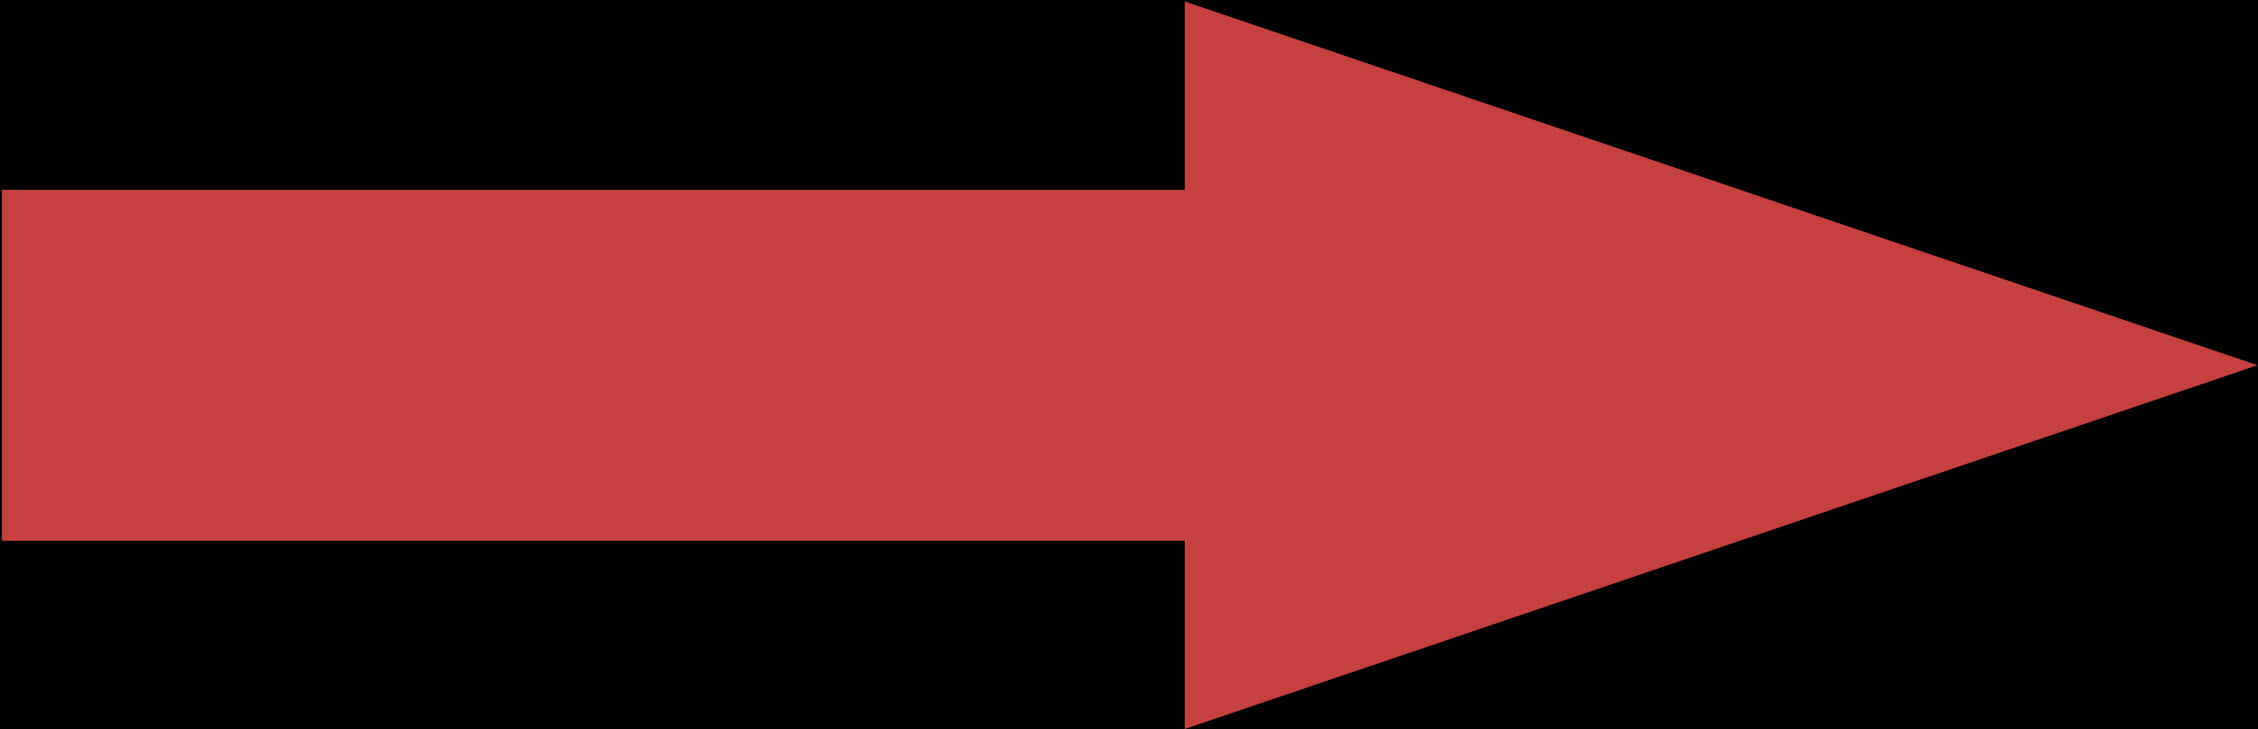 Red Arrow Graphic Directional Symbol PNG